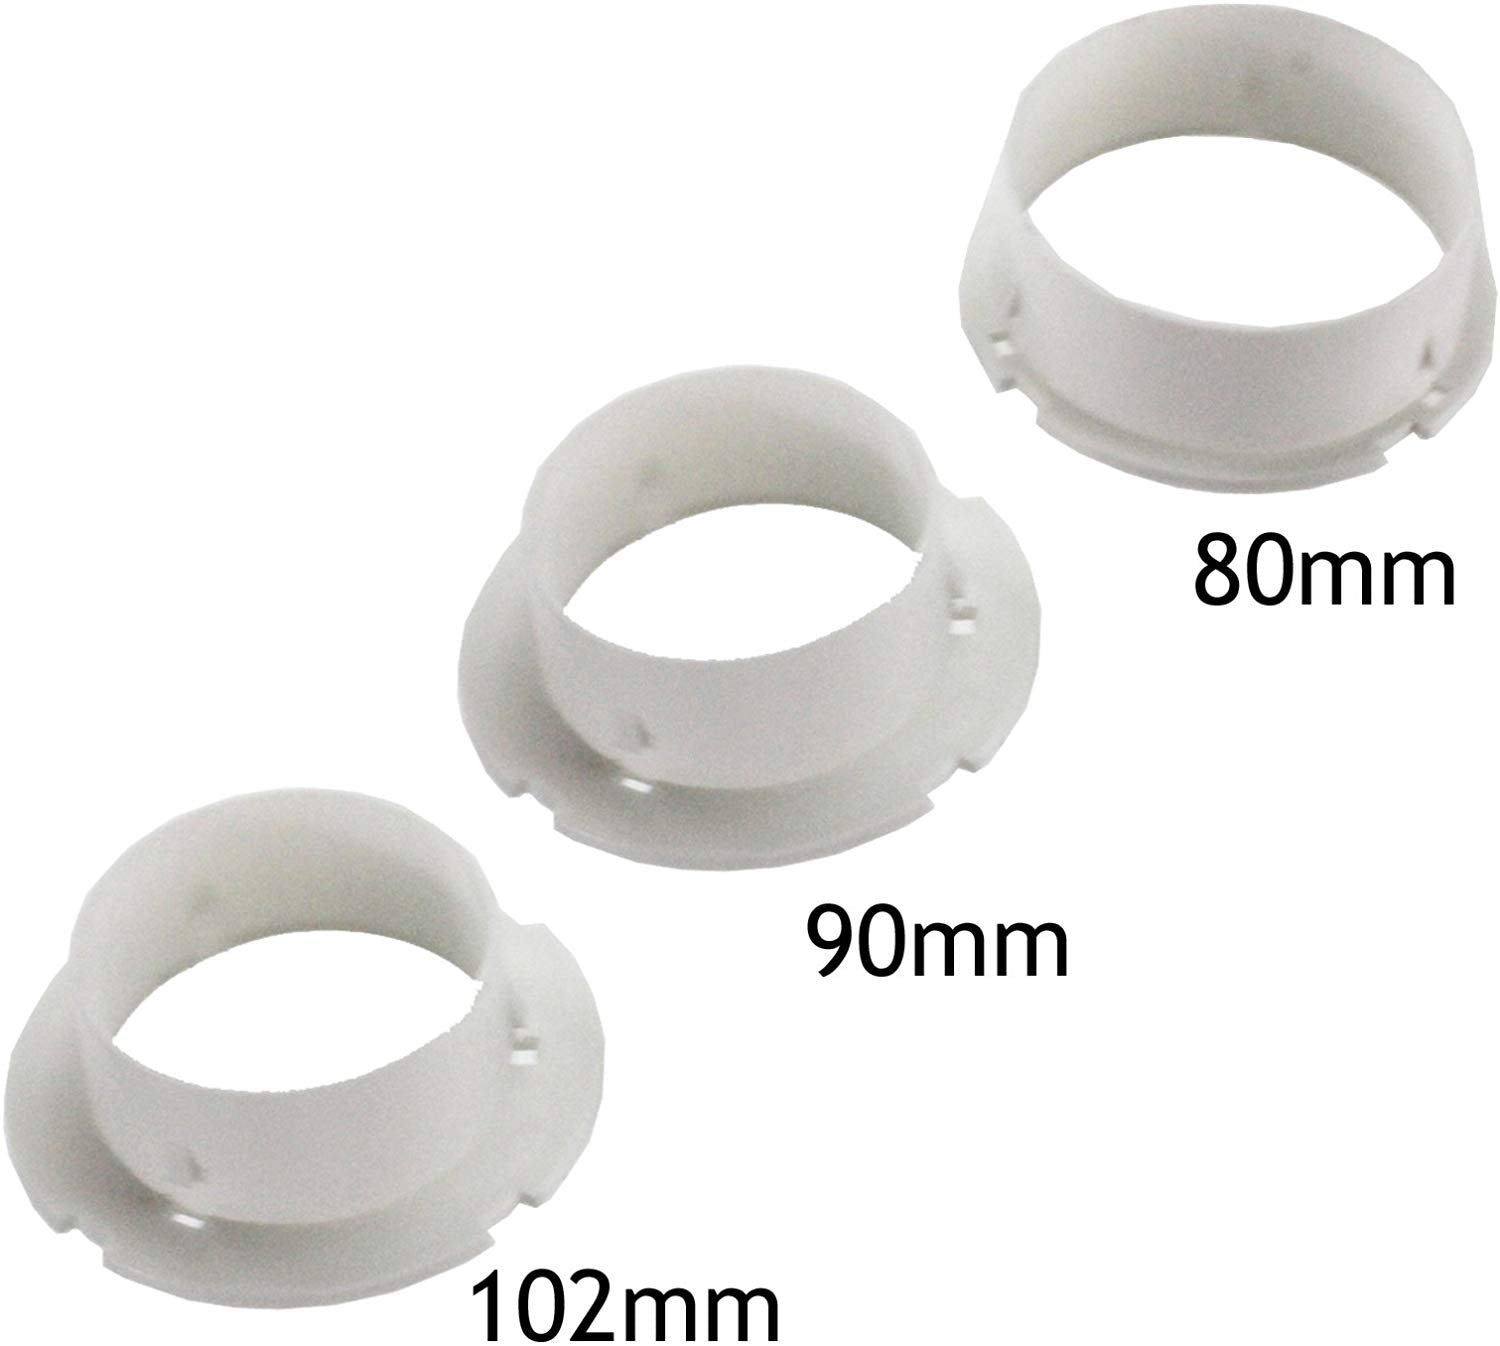 Vent Hose Condenser Kit with 3 x Adapters for Candy Tumble Dryer (1.2m)